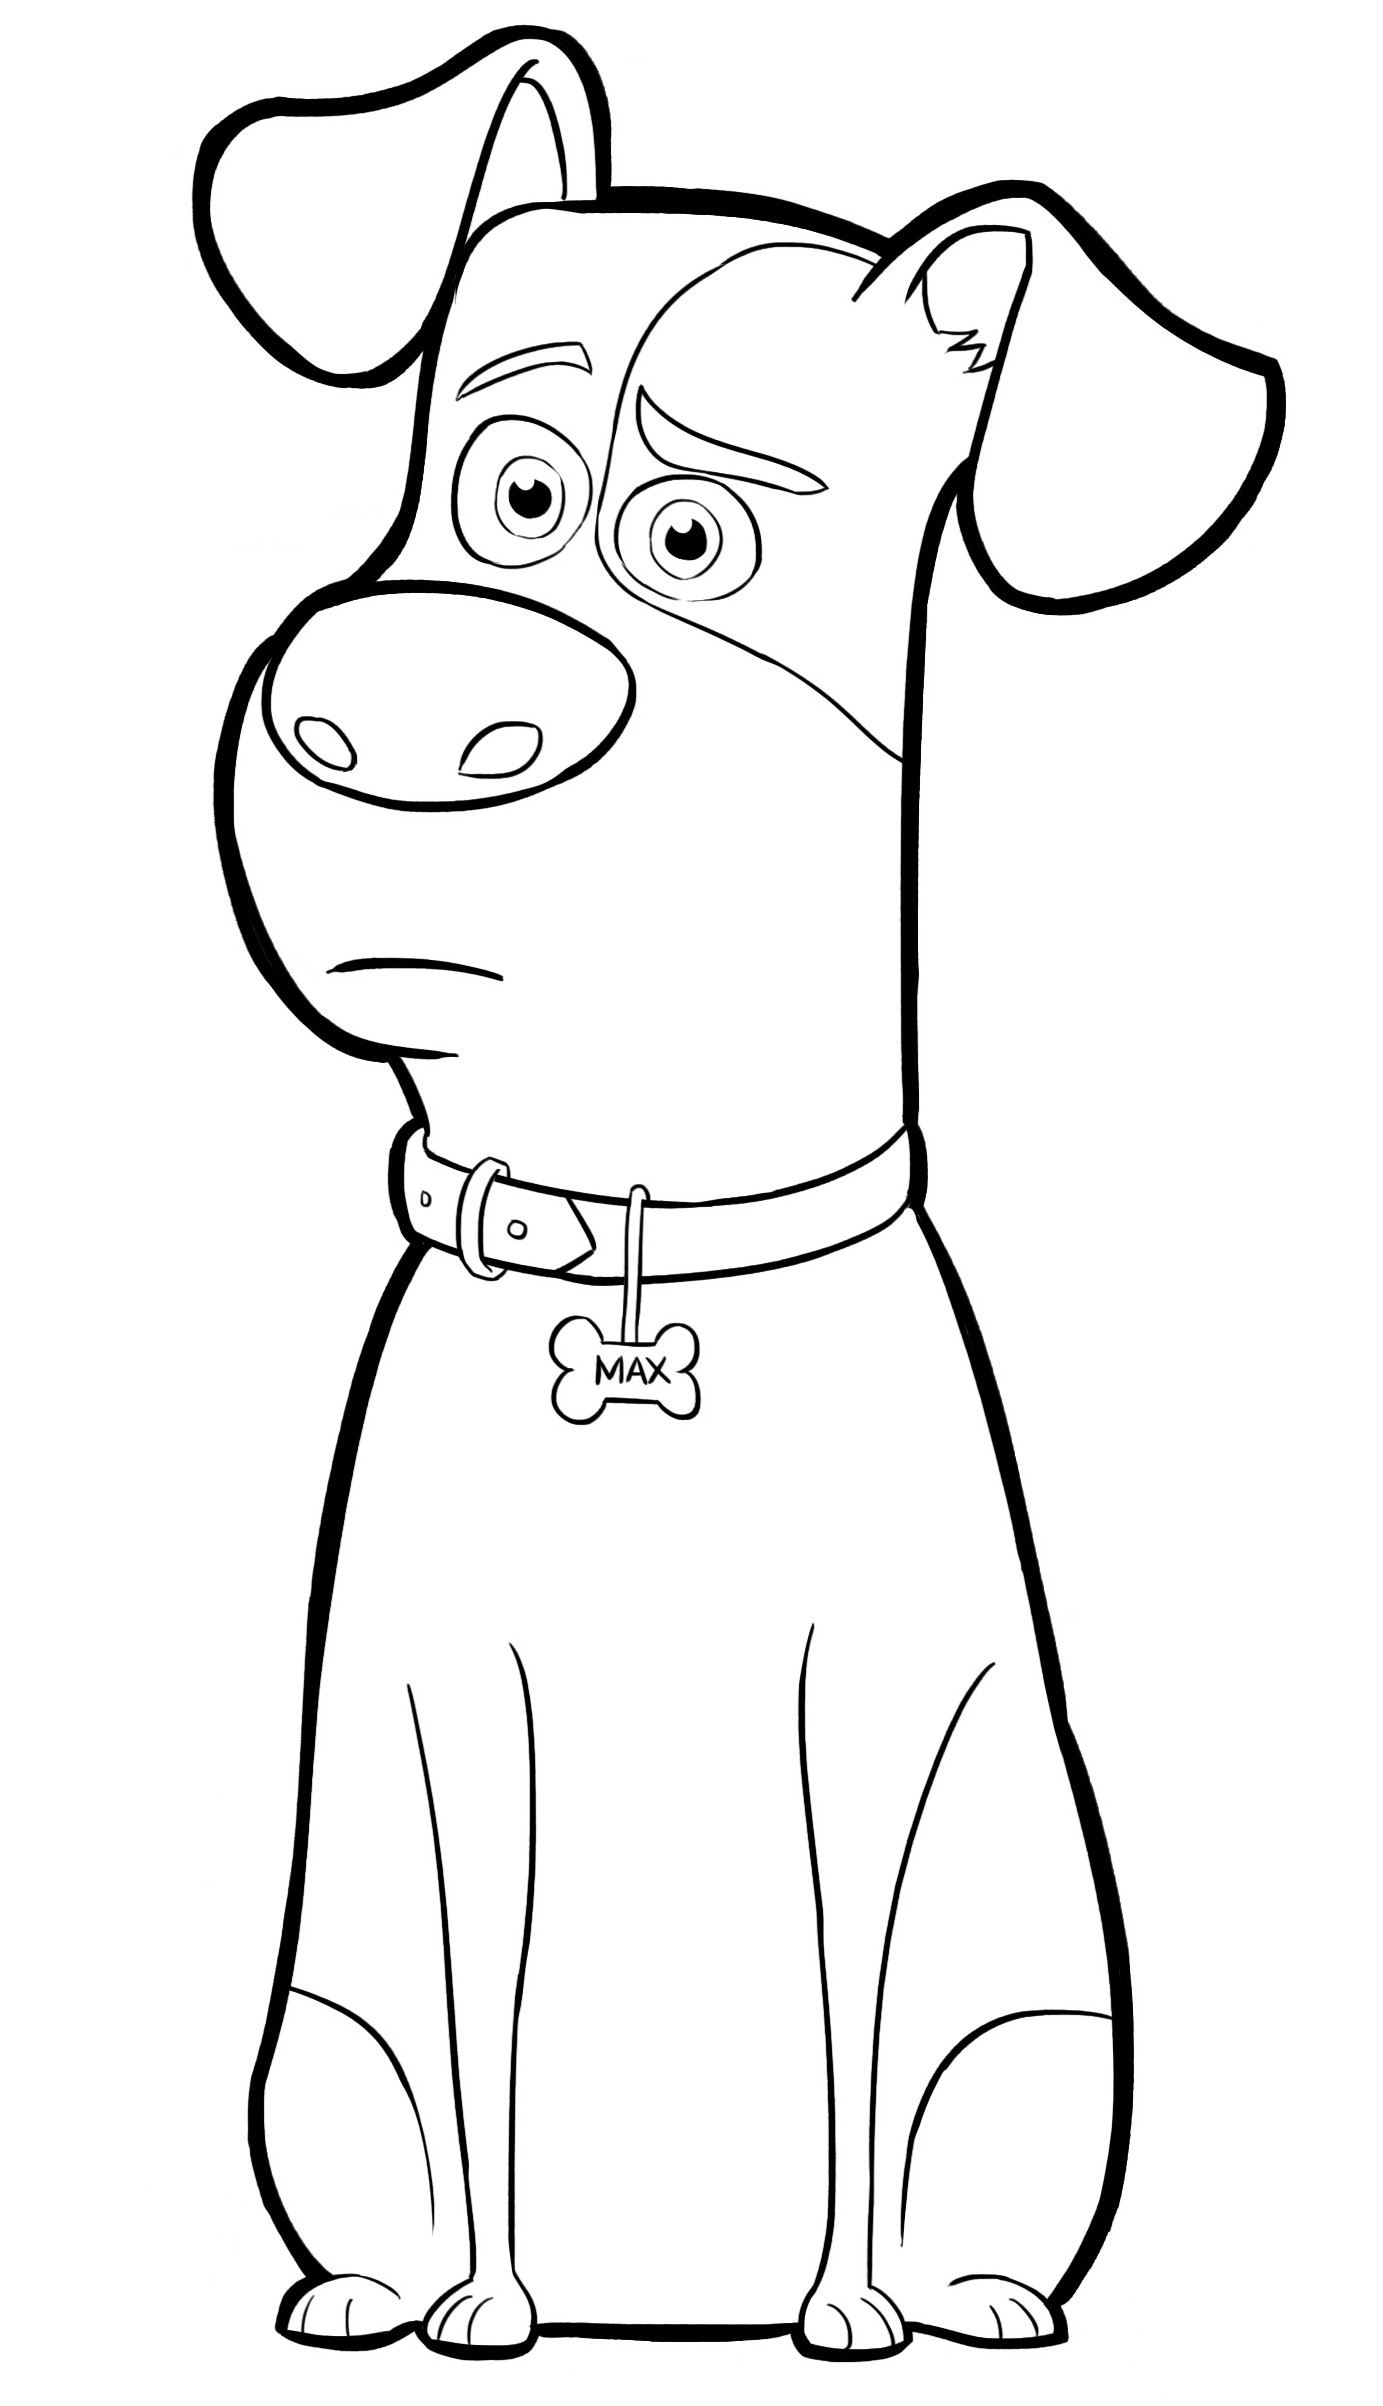 Printable Coloring Pages For Kids
 Pets Coloring Pages Best Coloring Pages For Kids